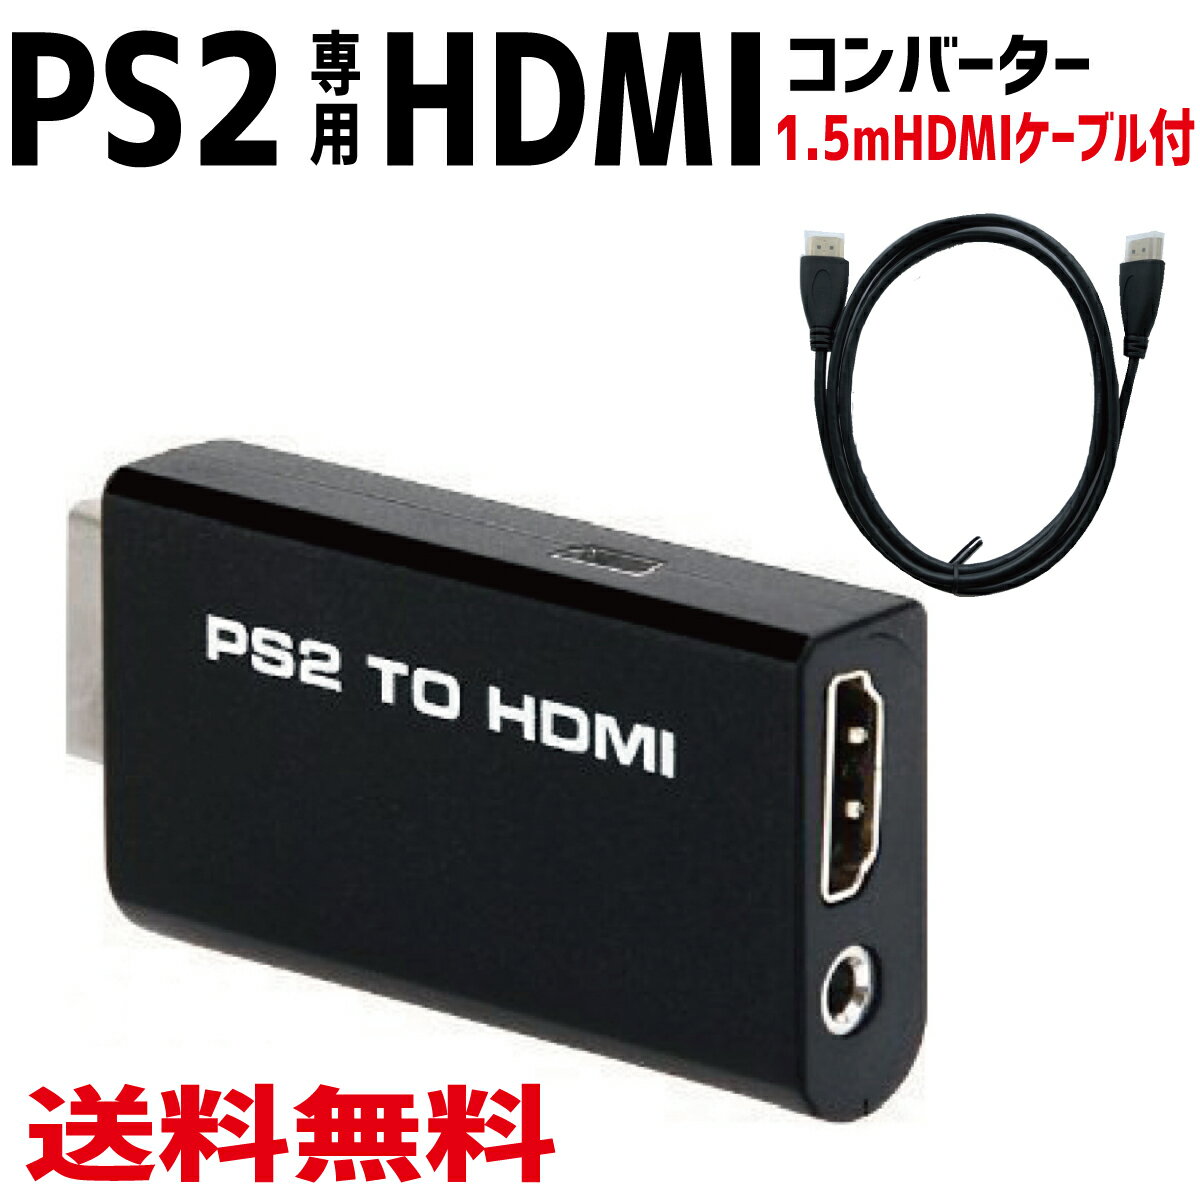 PS2 TO HDMI コンバーター PS2専用 PS2 to 